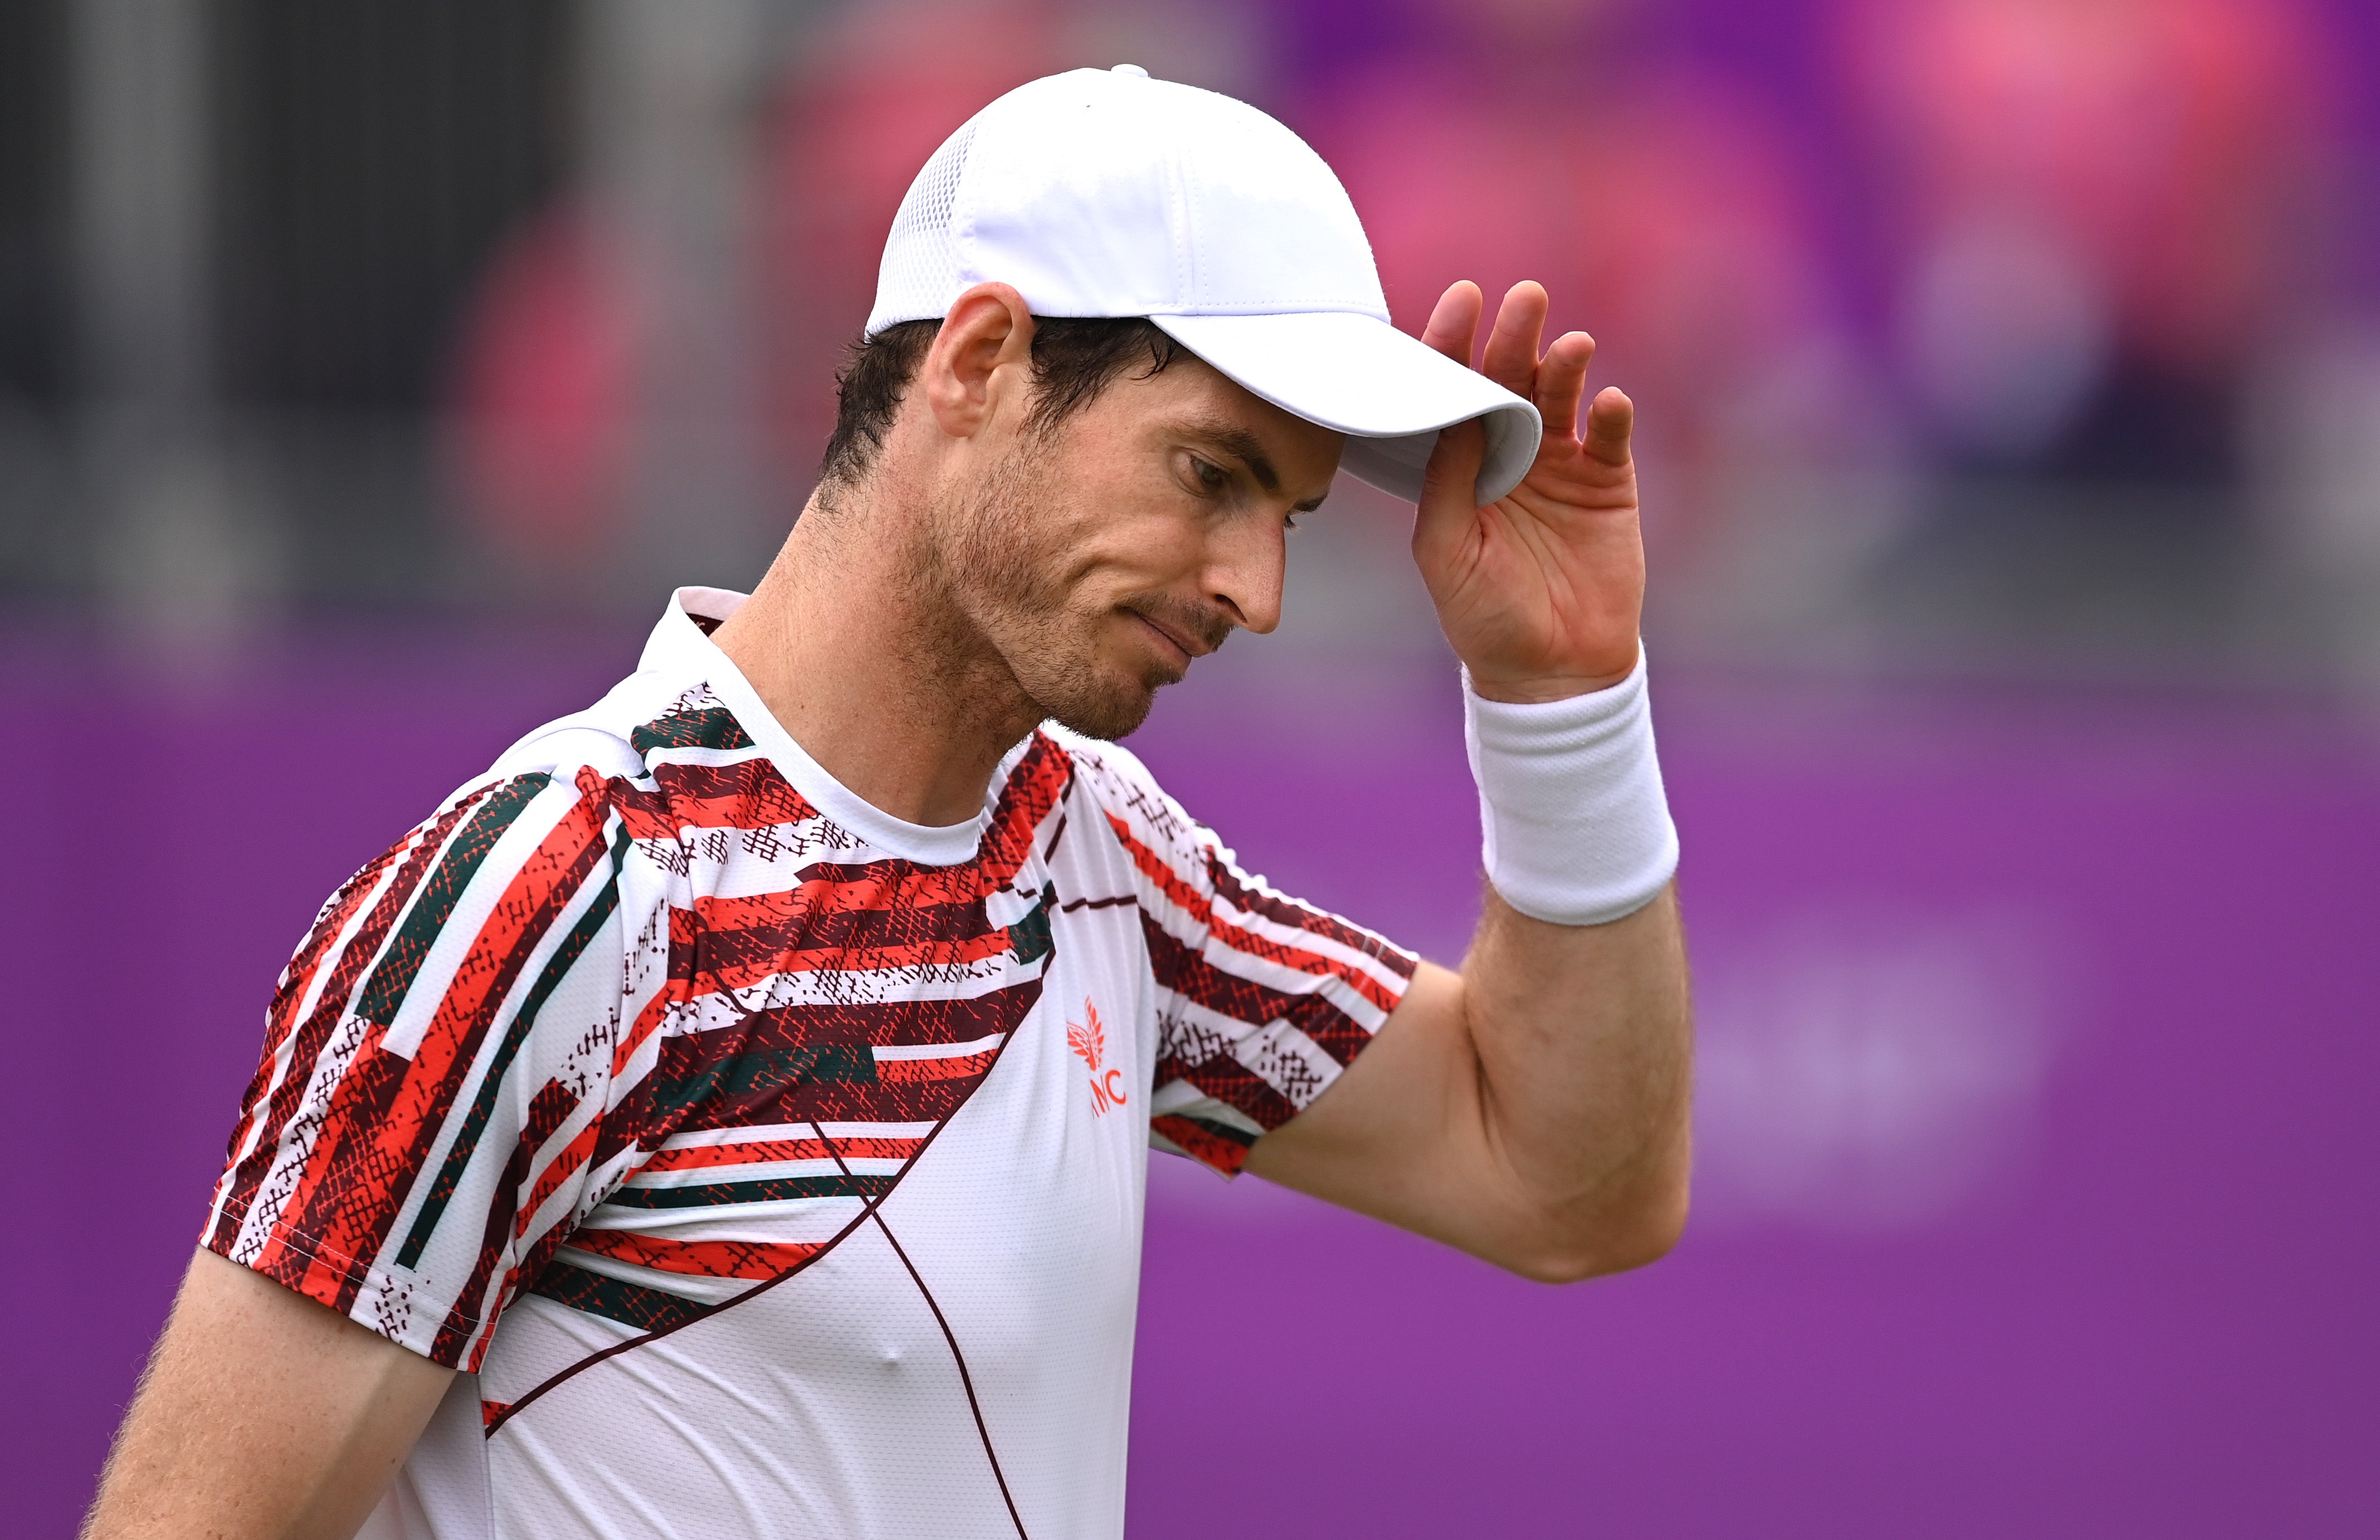 Andy Murray reacts against Matteo Berrettini at The Queen’s Club